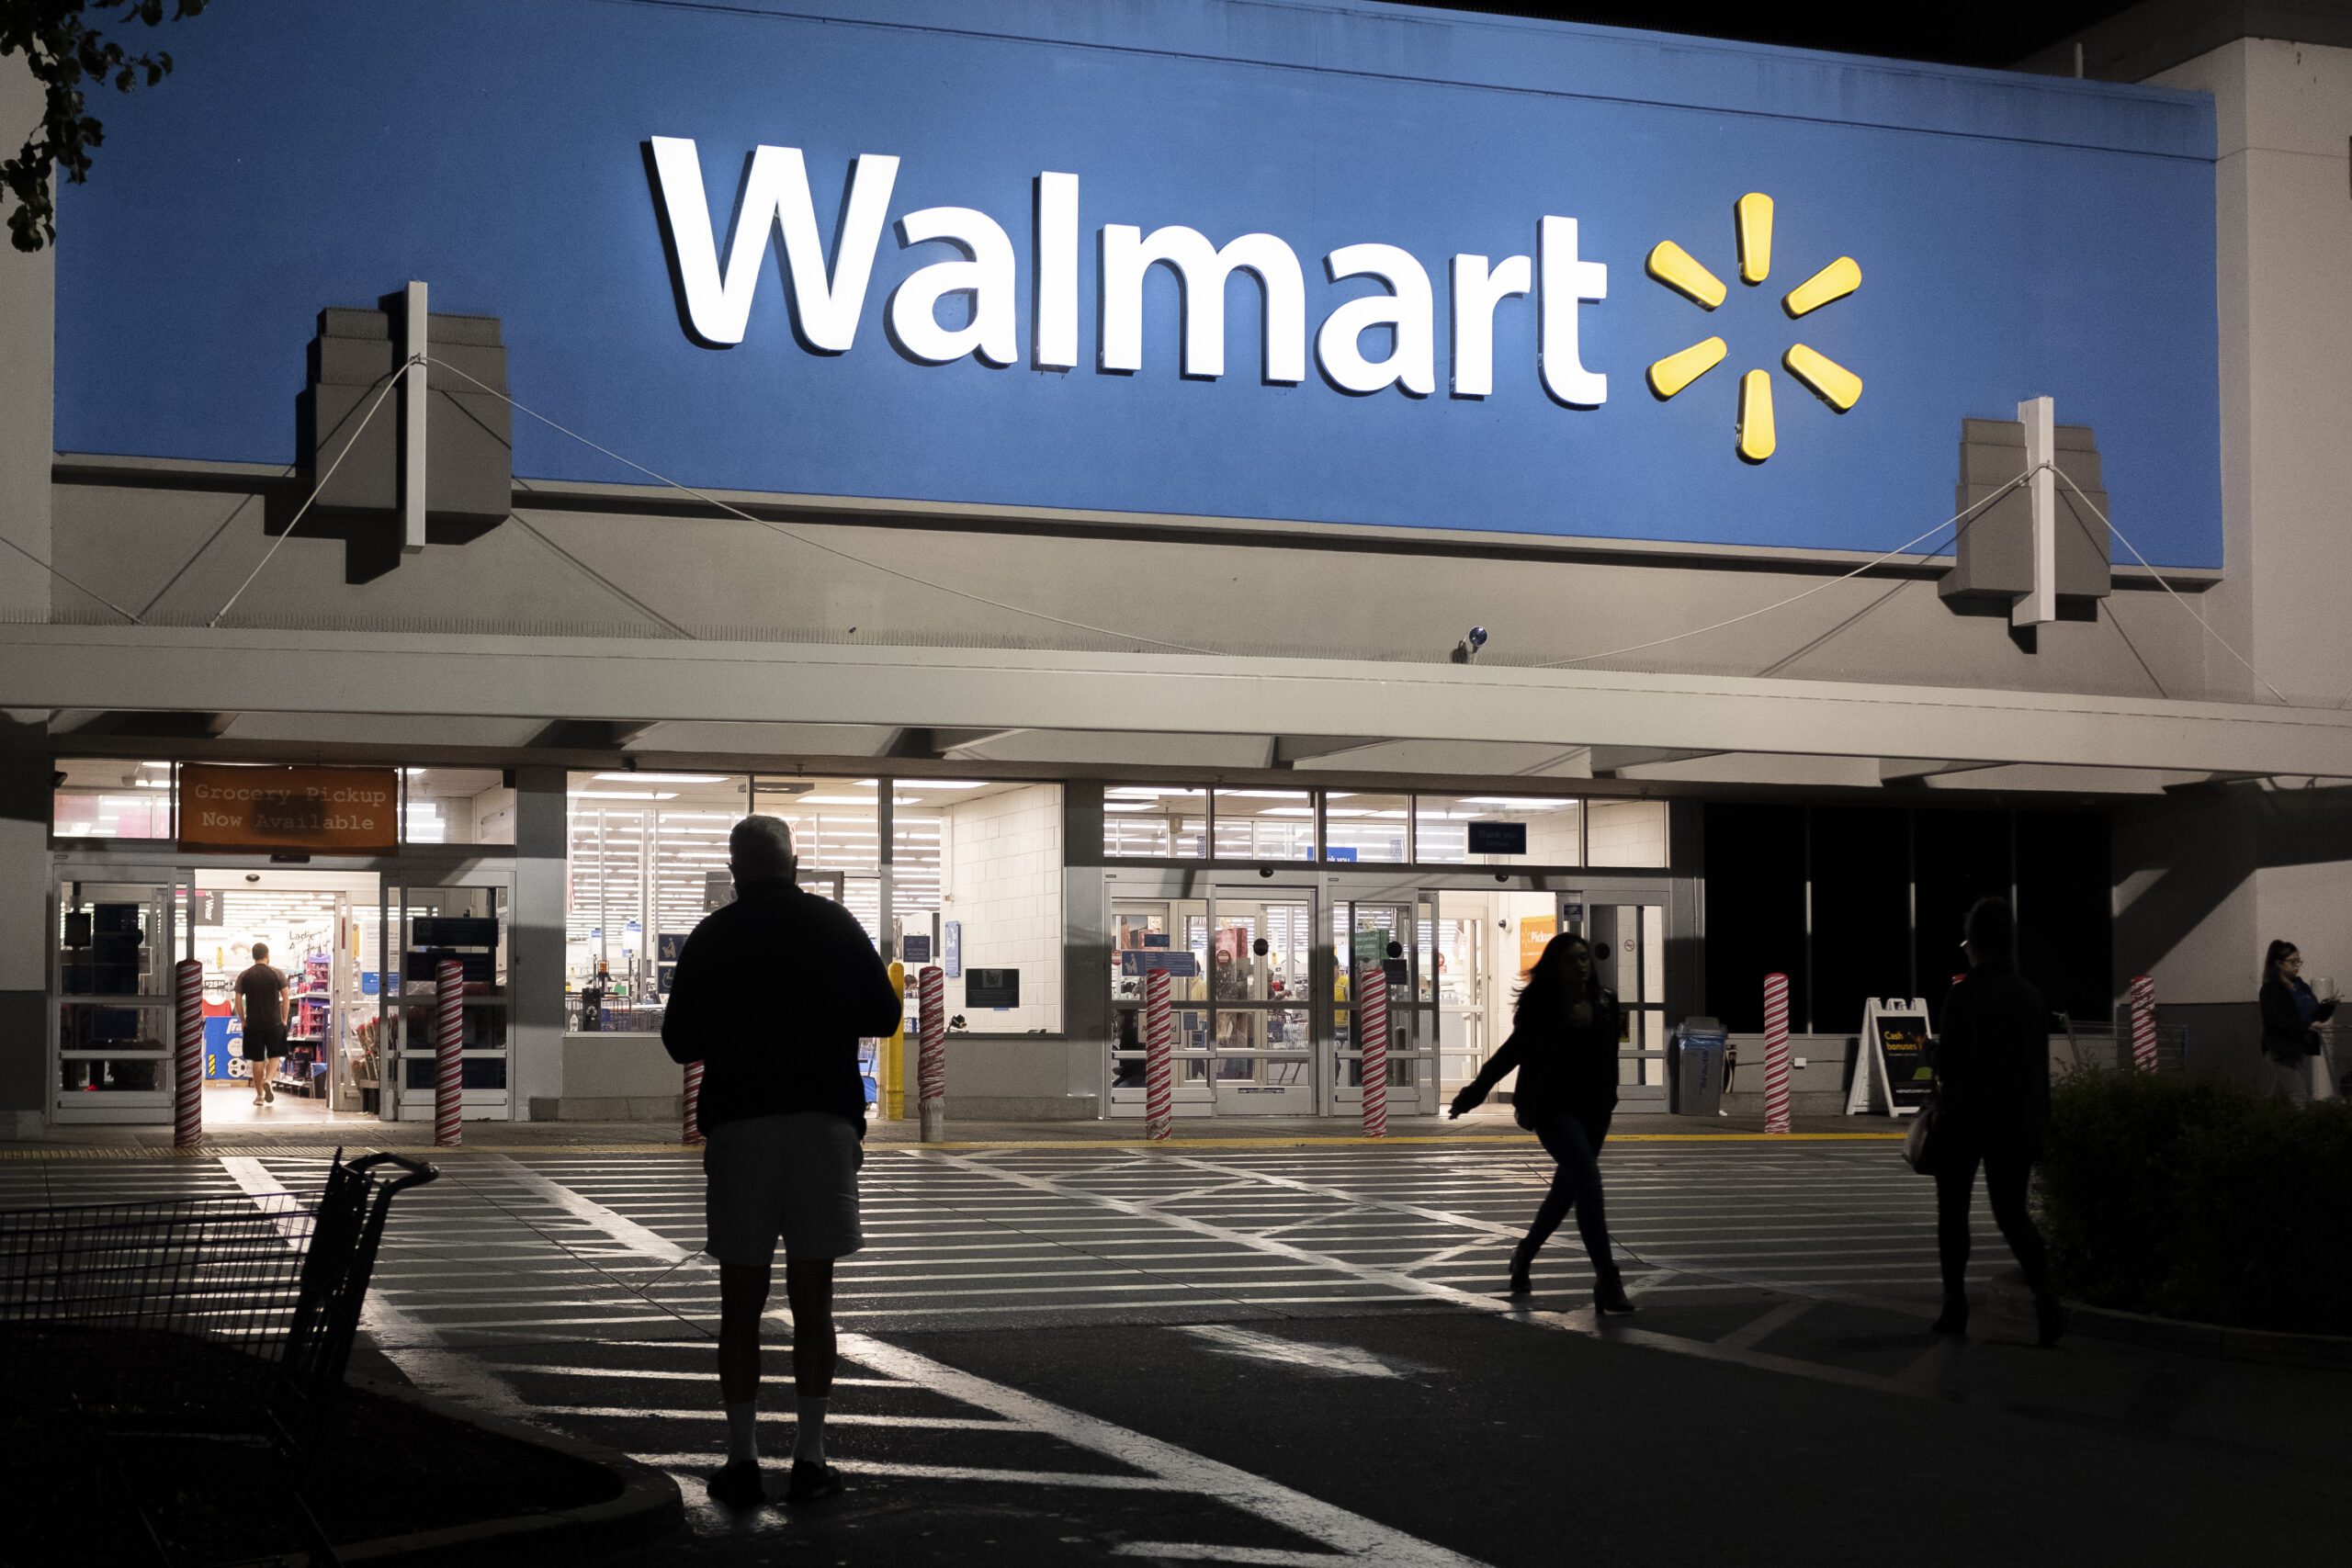 An image of the exterior of Walmart store, open 24 hours